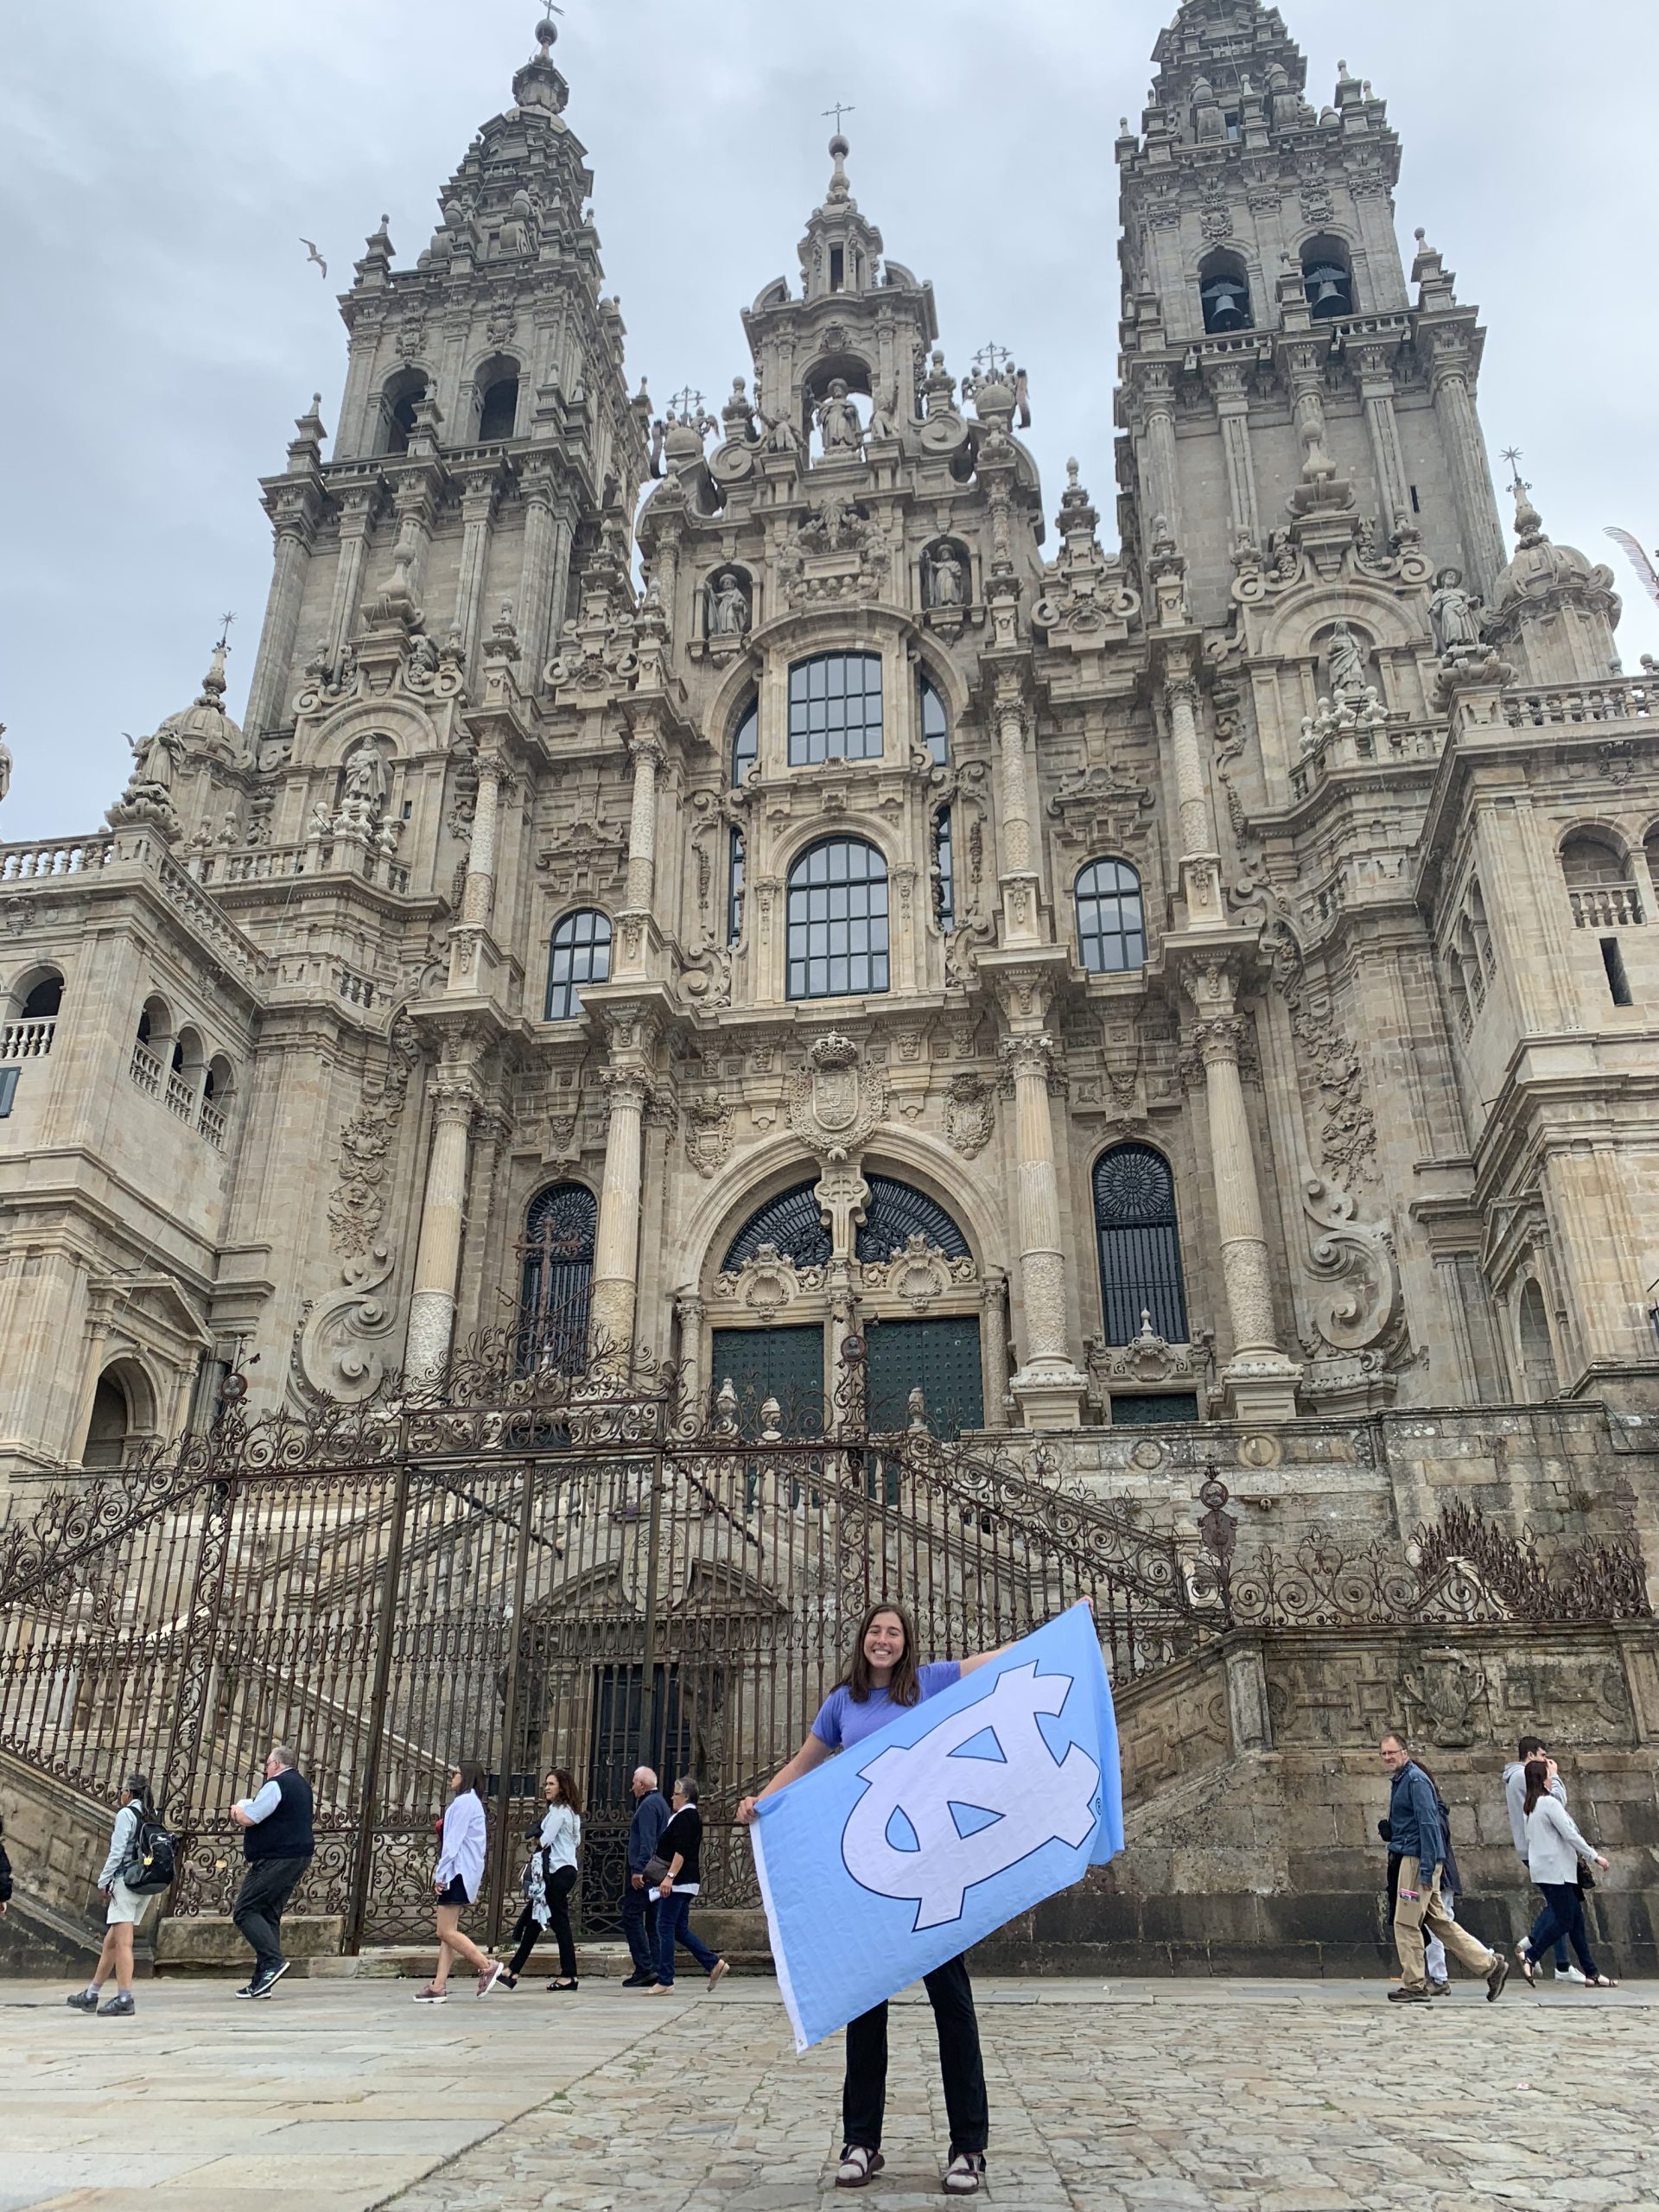 Alaina stands in front of a church in Spain holding a UNC flag.